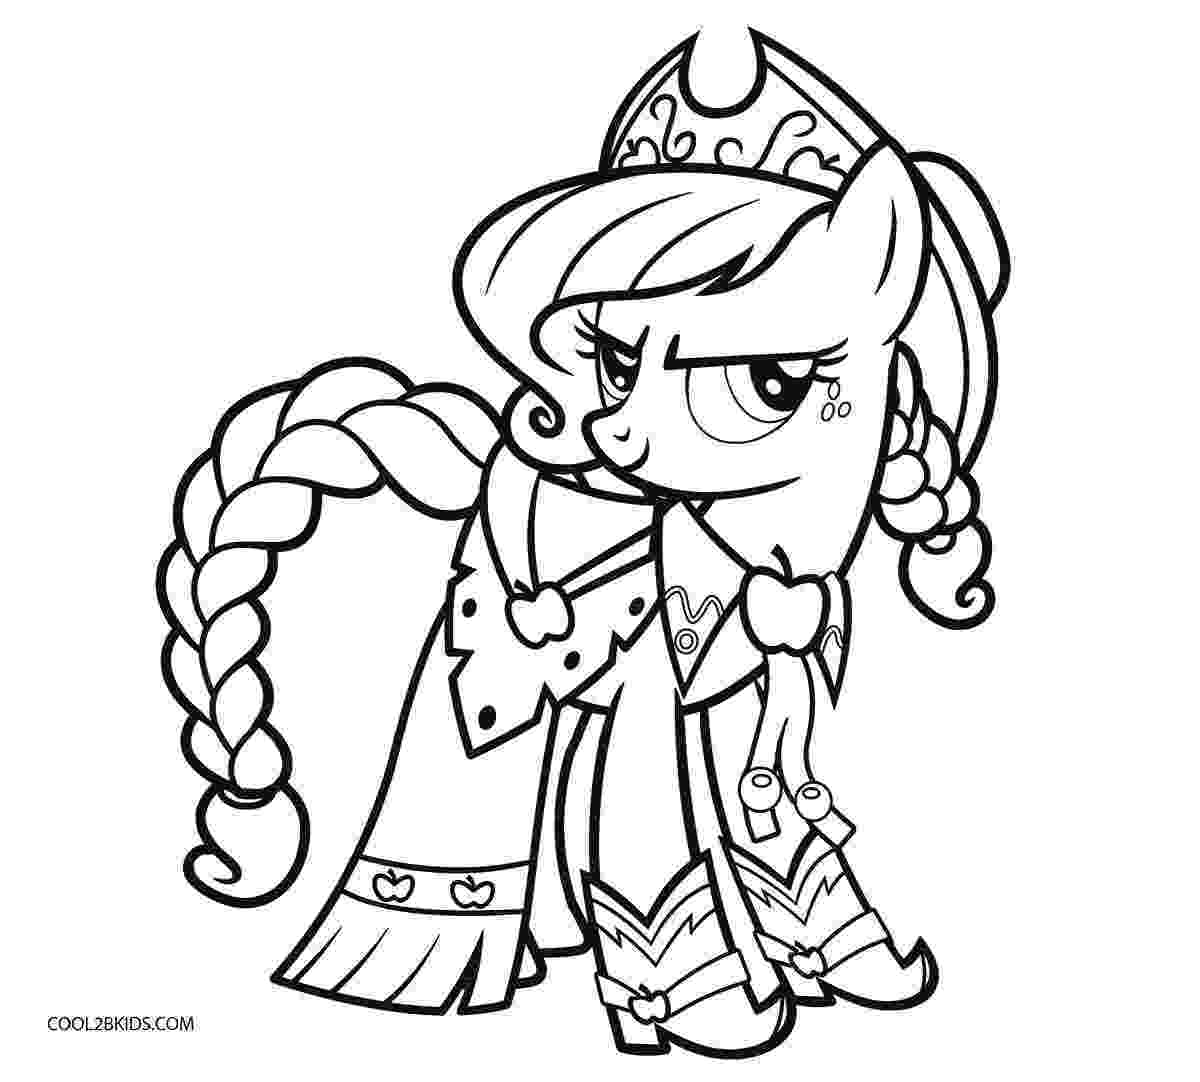 my little pony pics fun learn free worksheets for kid my little pony pony little pics my 